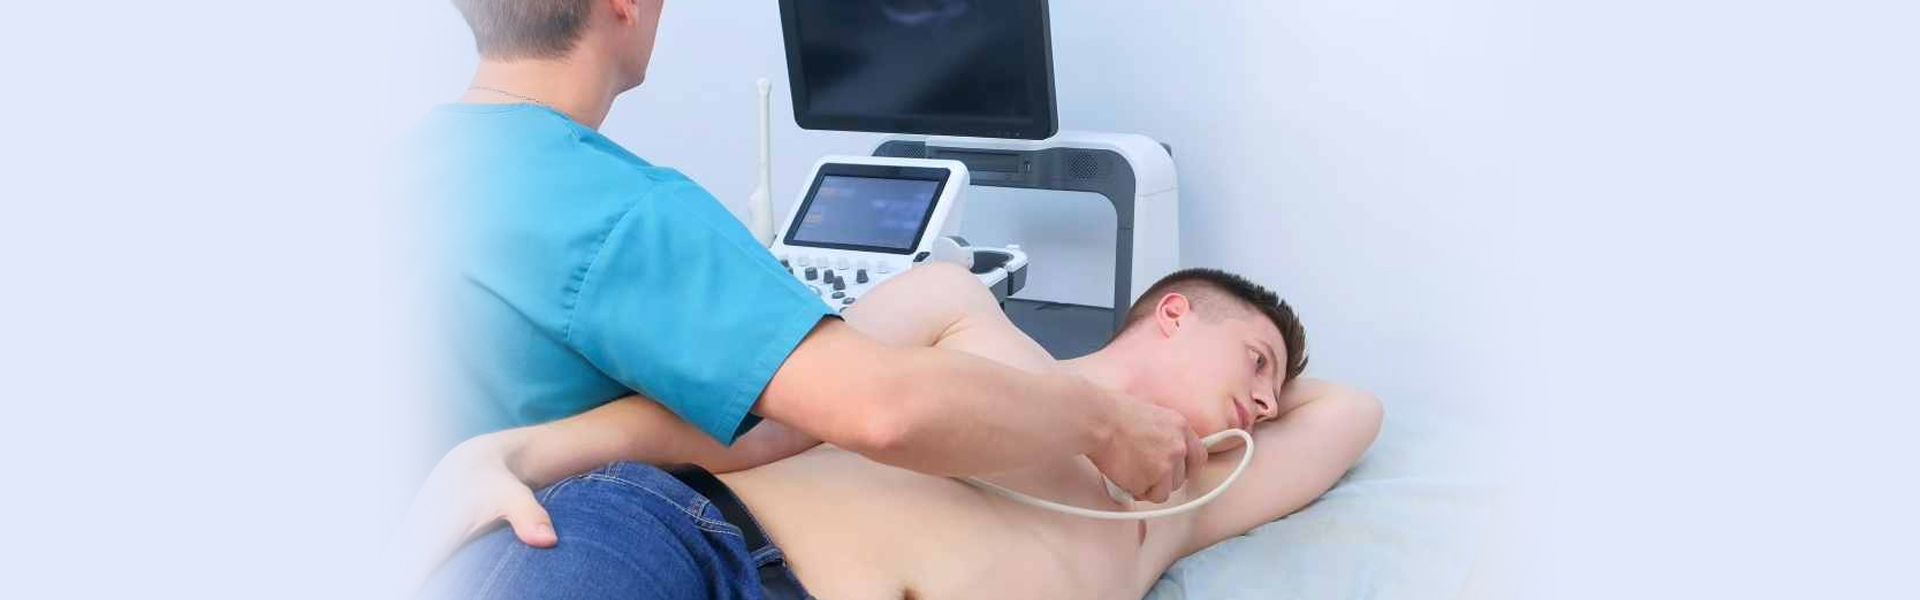 Fetal Echocardiography: Procedure, Expectations, and Types